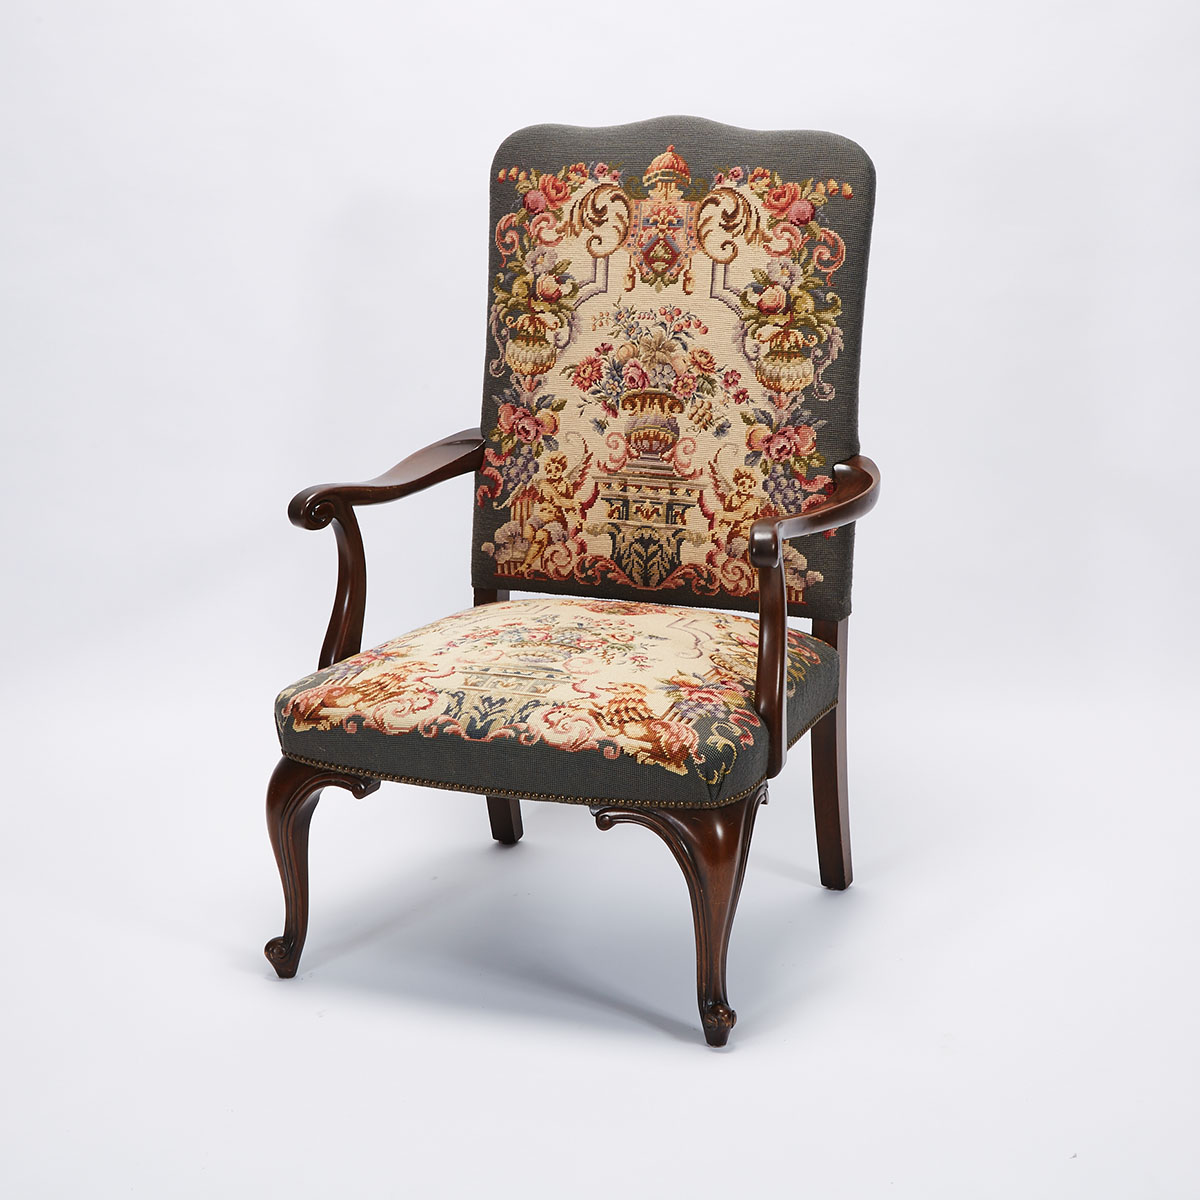 Hepplewhite Style Mahogany Open Arm Library Chair, late 19th century